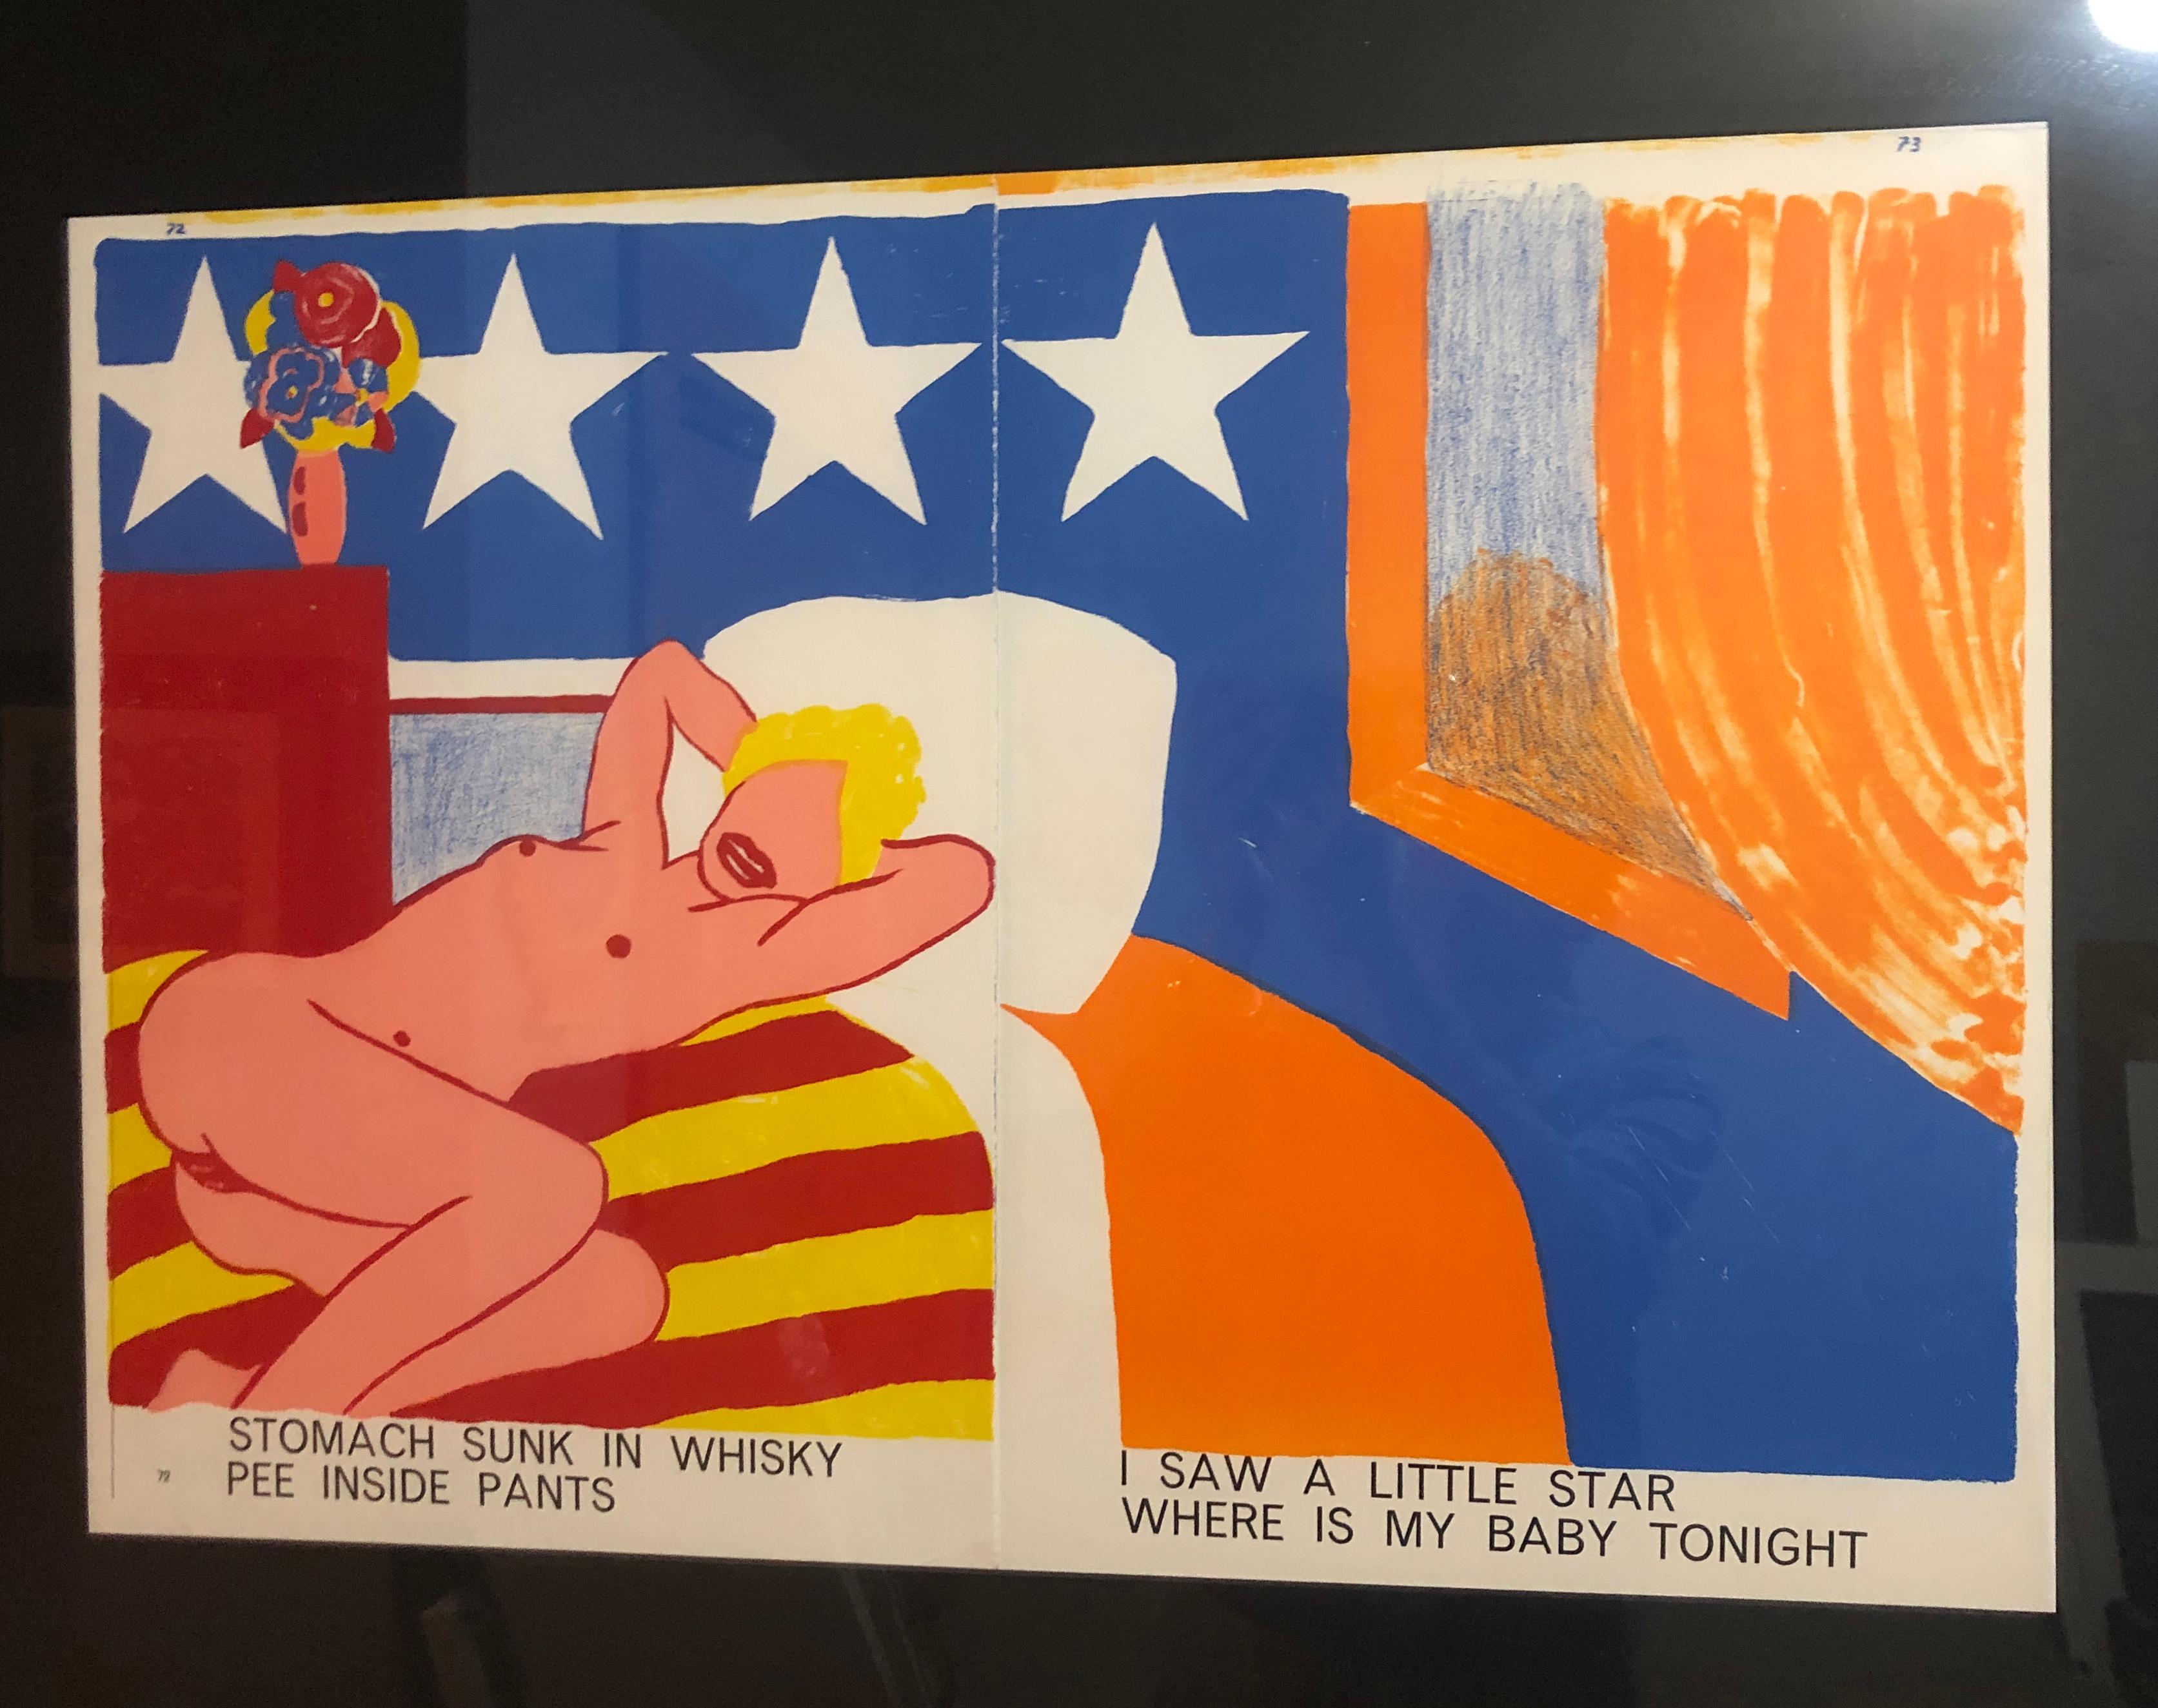 A horizontal Pop style color lithograph of a female nude and interior in red, yellow, orange, and blue by Tom Wesselmann, with poetry by Walasse Ting. The work was included in the 